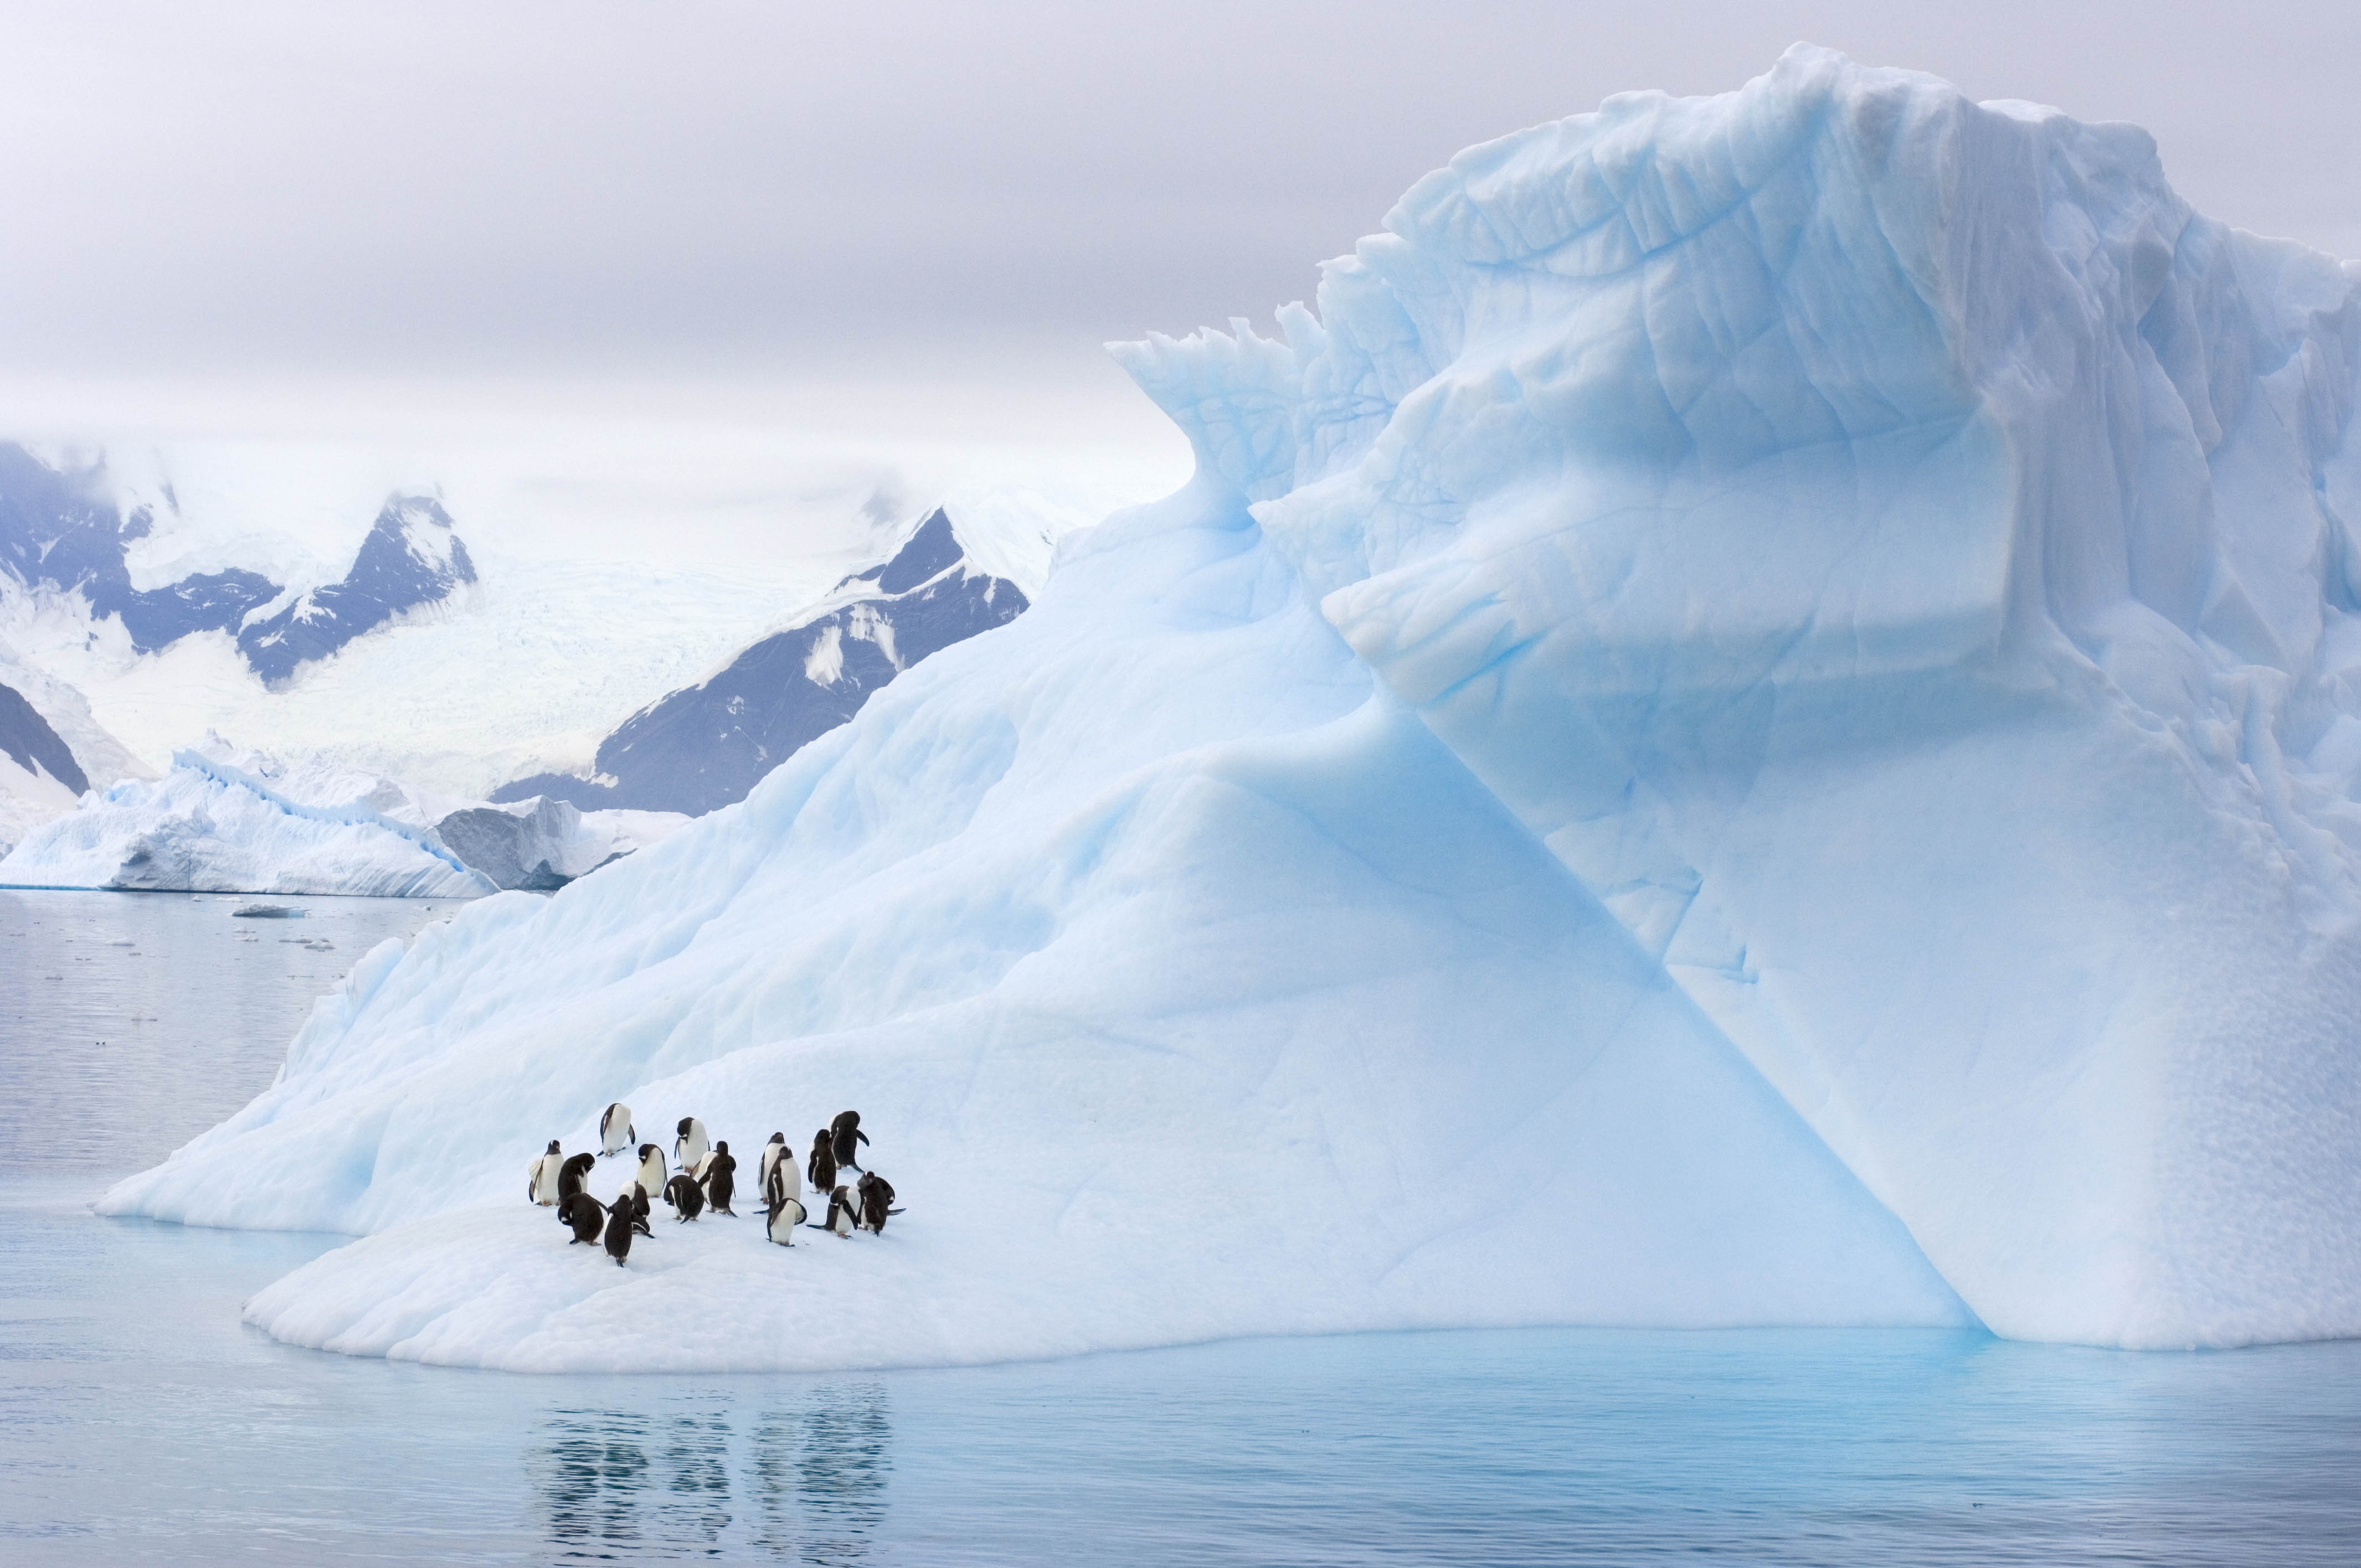 Gentoo Penguins and Chinstrap Penguins on an iceberg on the Western Antarctic Peninsula, Antarctica, Southern Ocean. (Photo by Steven Kazlowski / Barcroft Media / Getty Images)